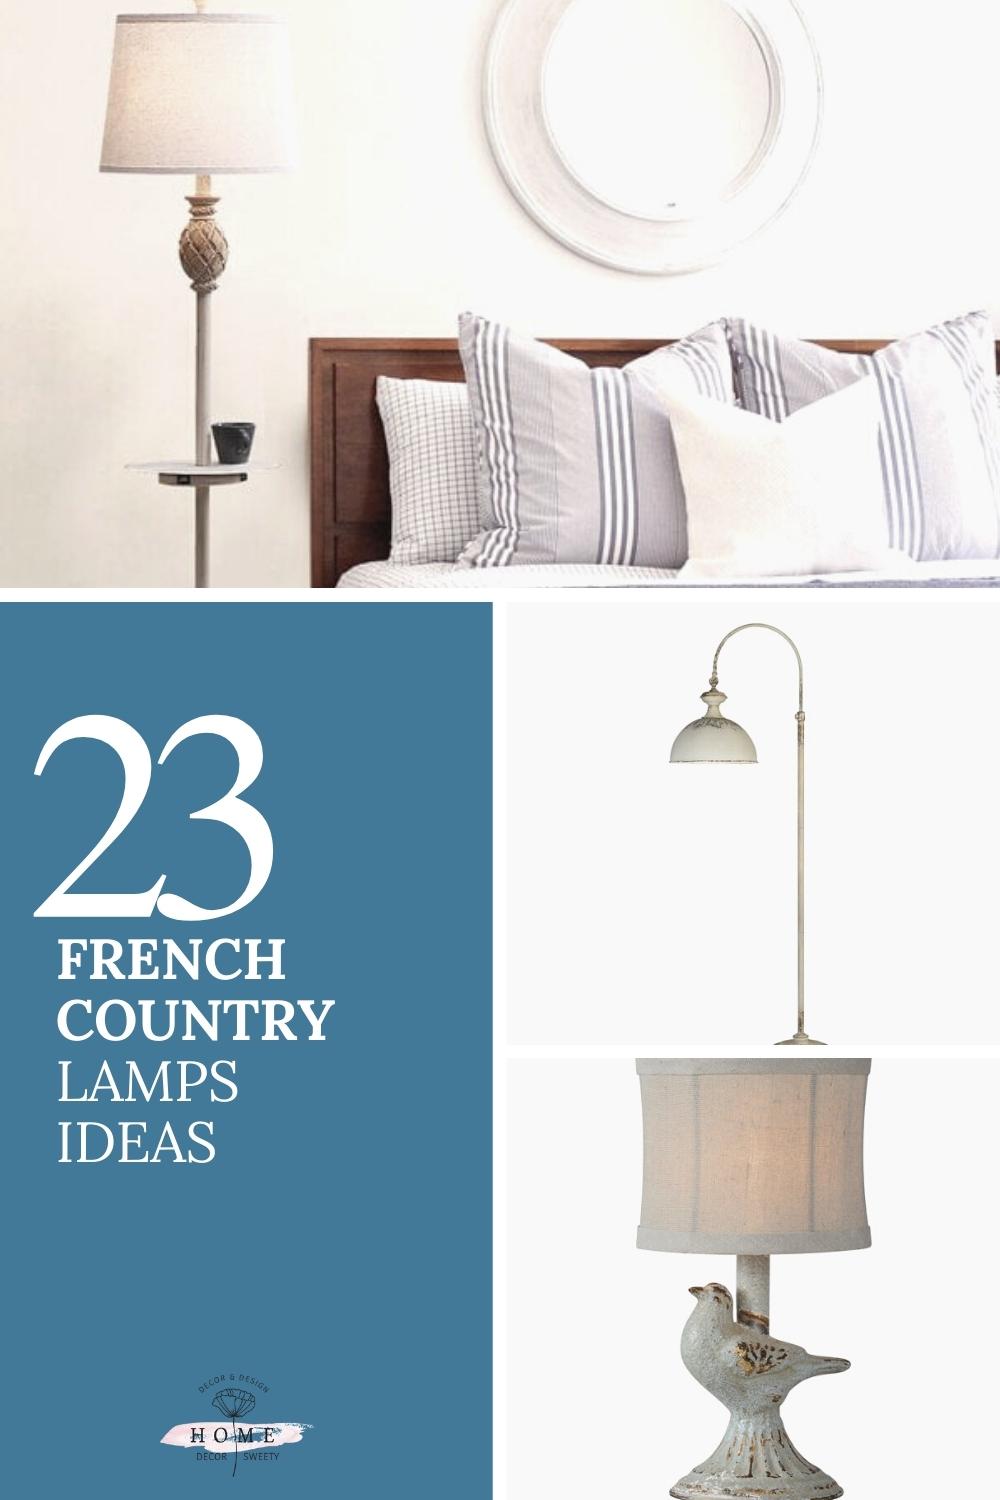 French Country lamps